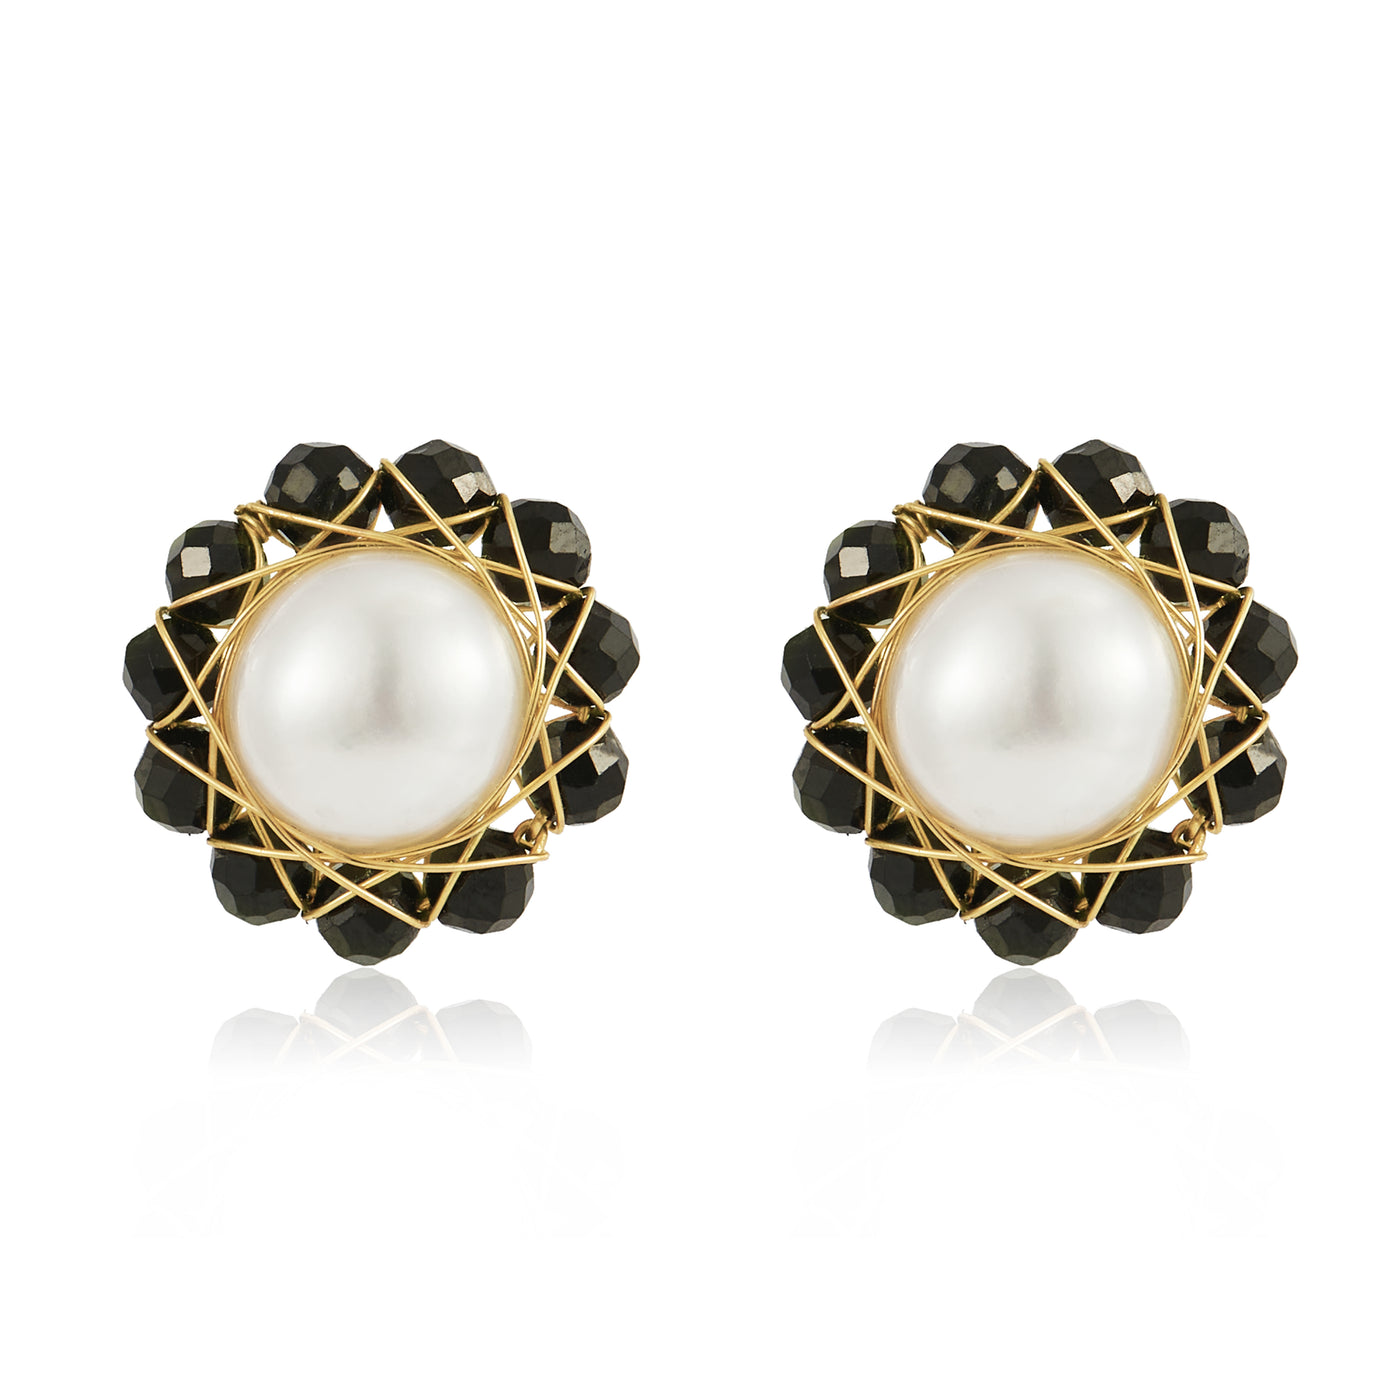 COCO KIM Mix Colors Series Black Spinel  & Pearl Stud Earrings